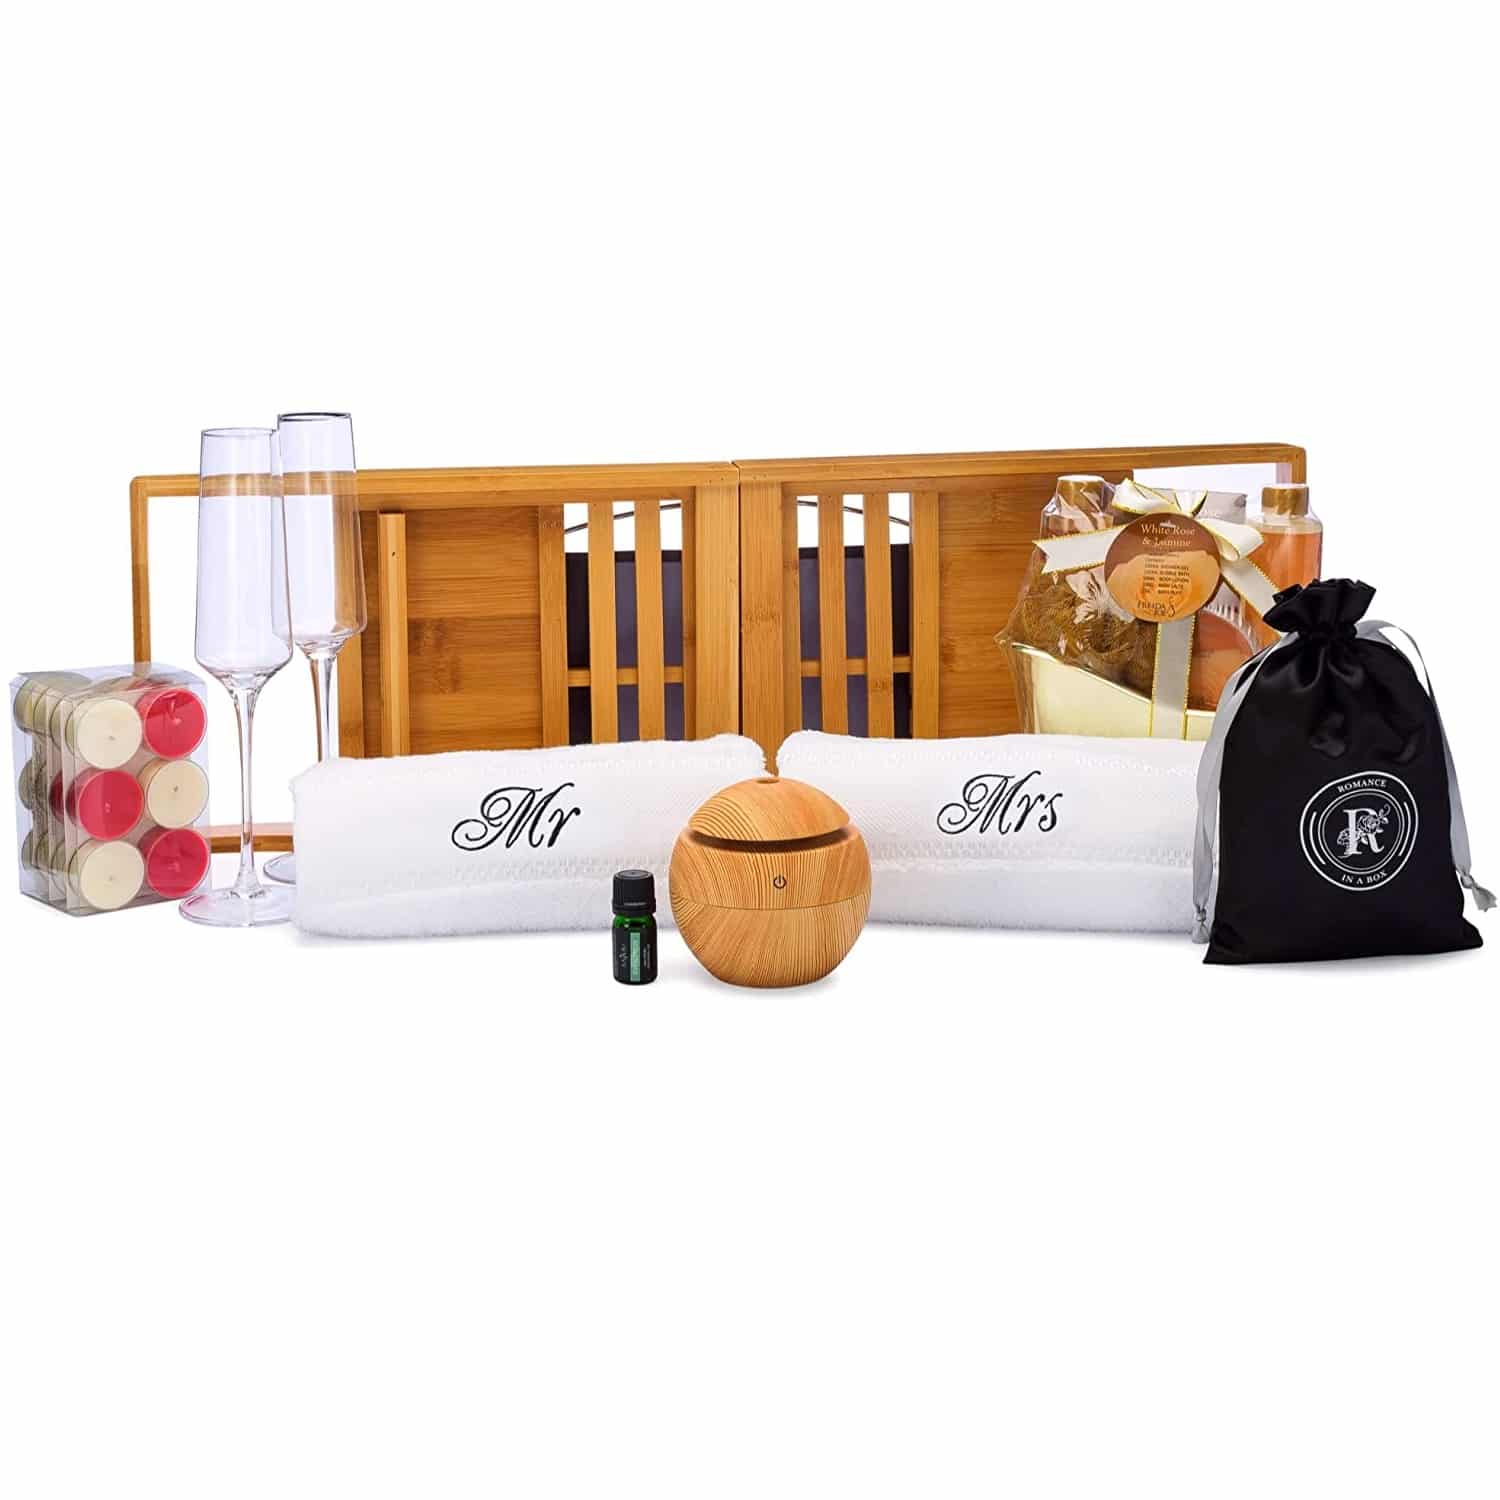 Mr and Mrs Towels Spa Gift Box